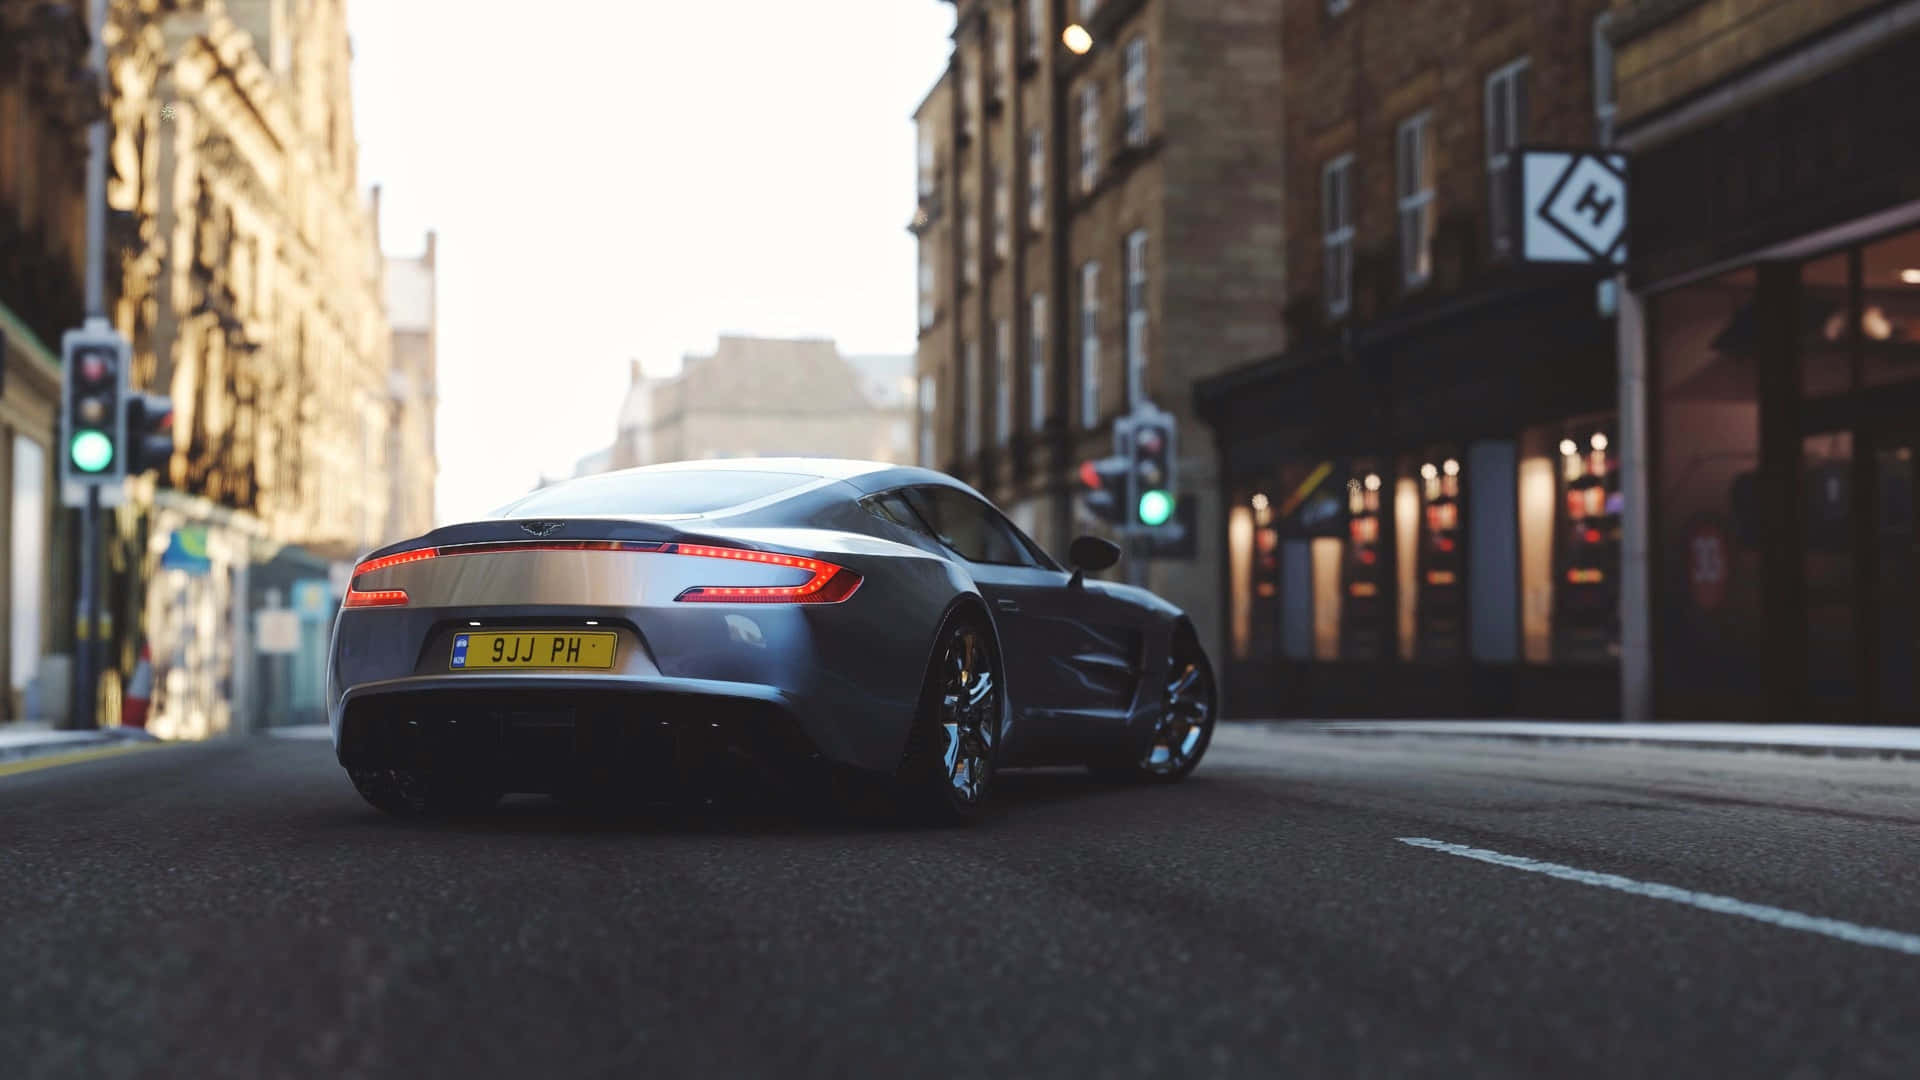 Stunning and Luxurious Aston Martin One-77 in Action Wallpaper